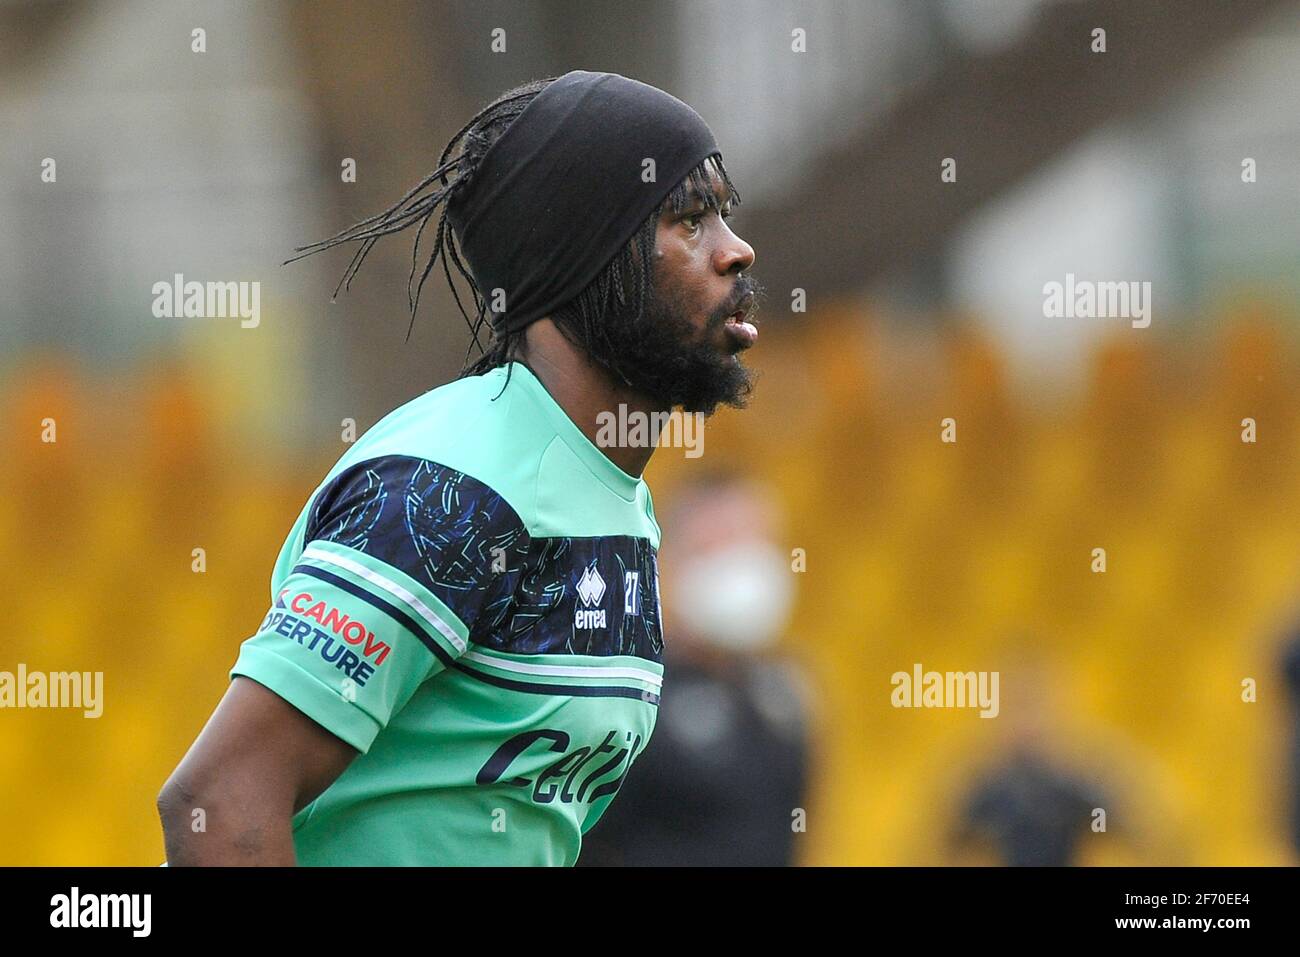 Benevento, Italy, April 03, 2021. Gervinho player of Parma, during the match of the Italian football league Serie A between Benevento vs Parma final result 2-2, match played at the Ciro Vigorito stadium in Benevento. Credit: Vincenzo Izzo/Alamy Live News Stock Photo